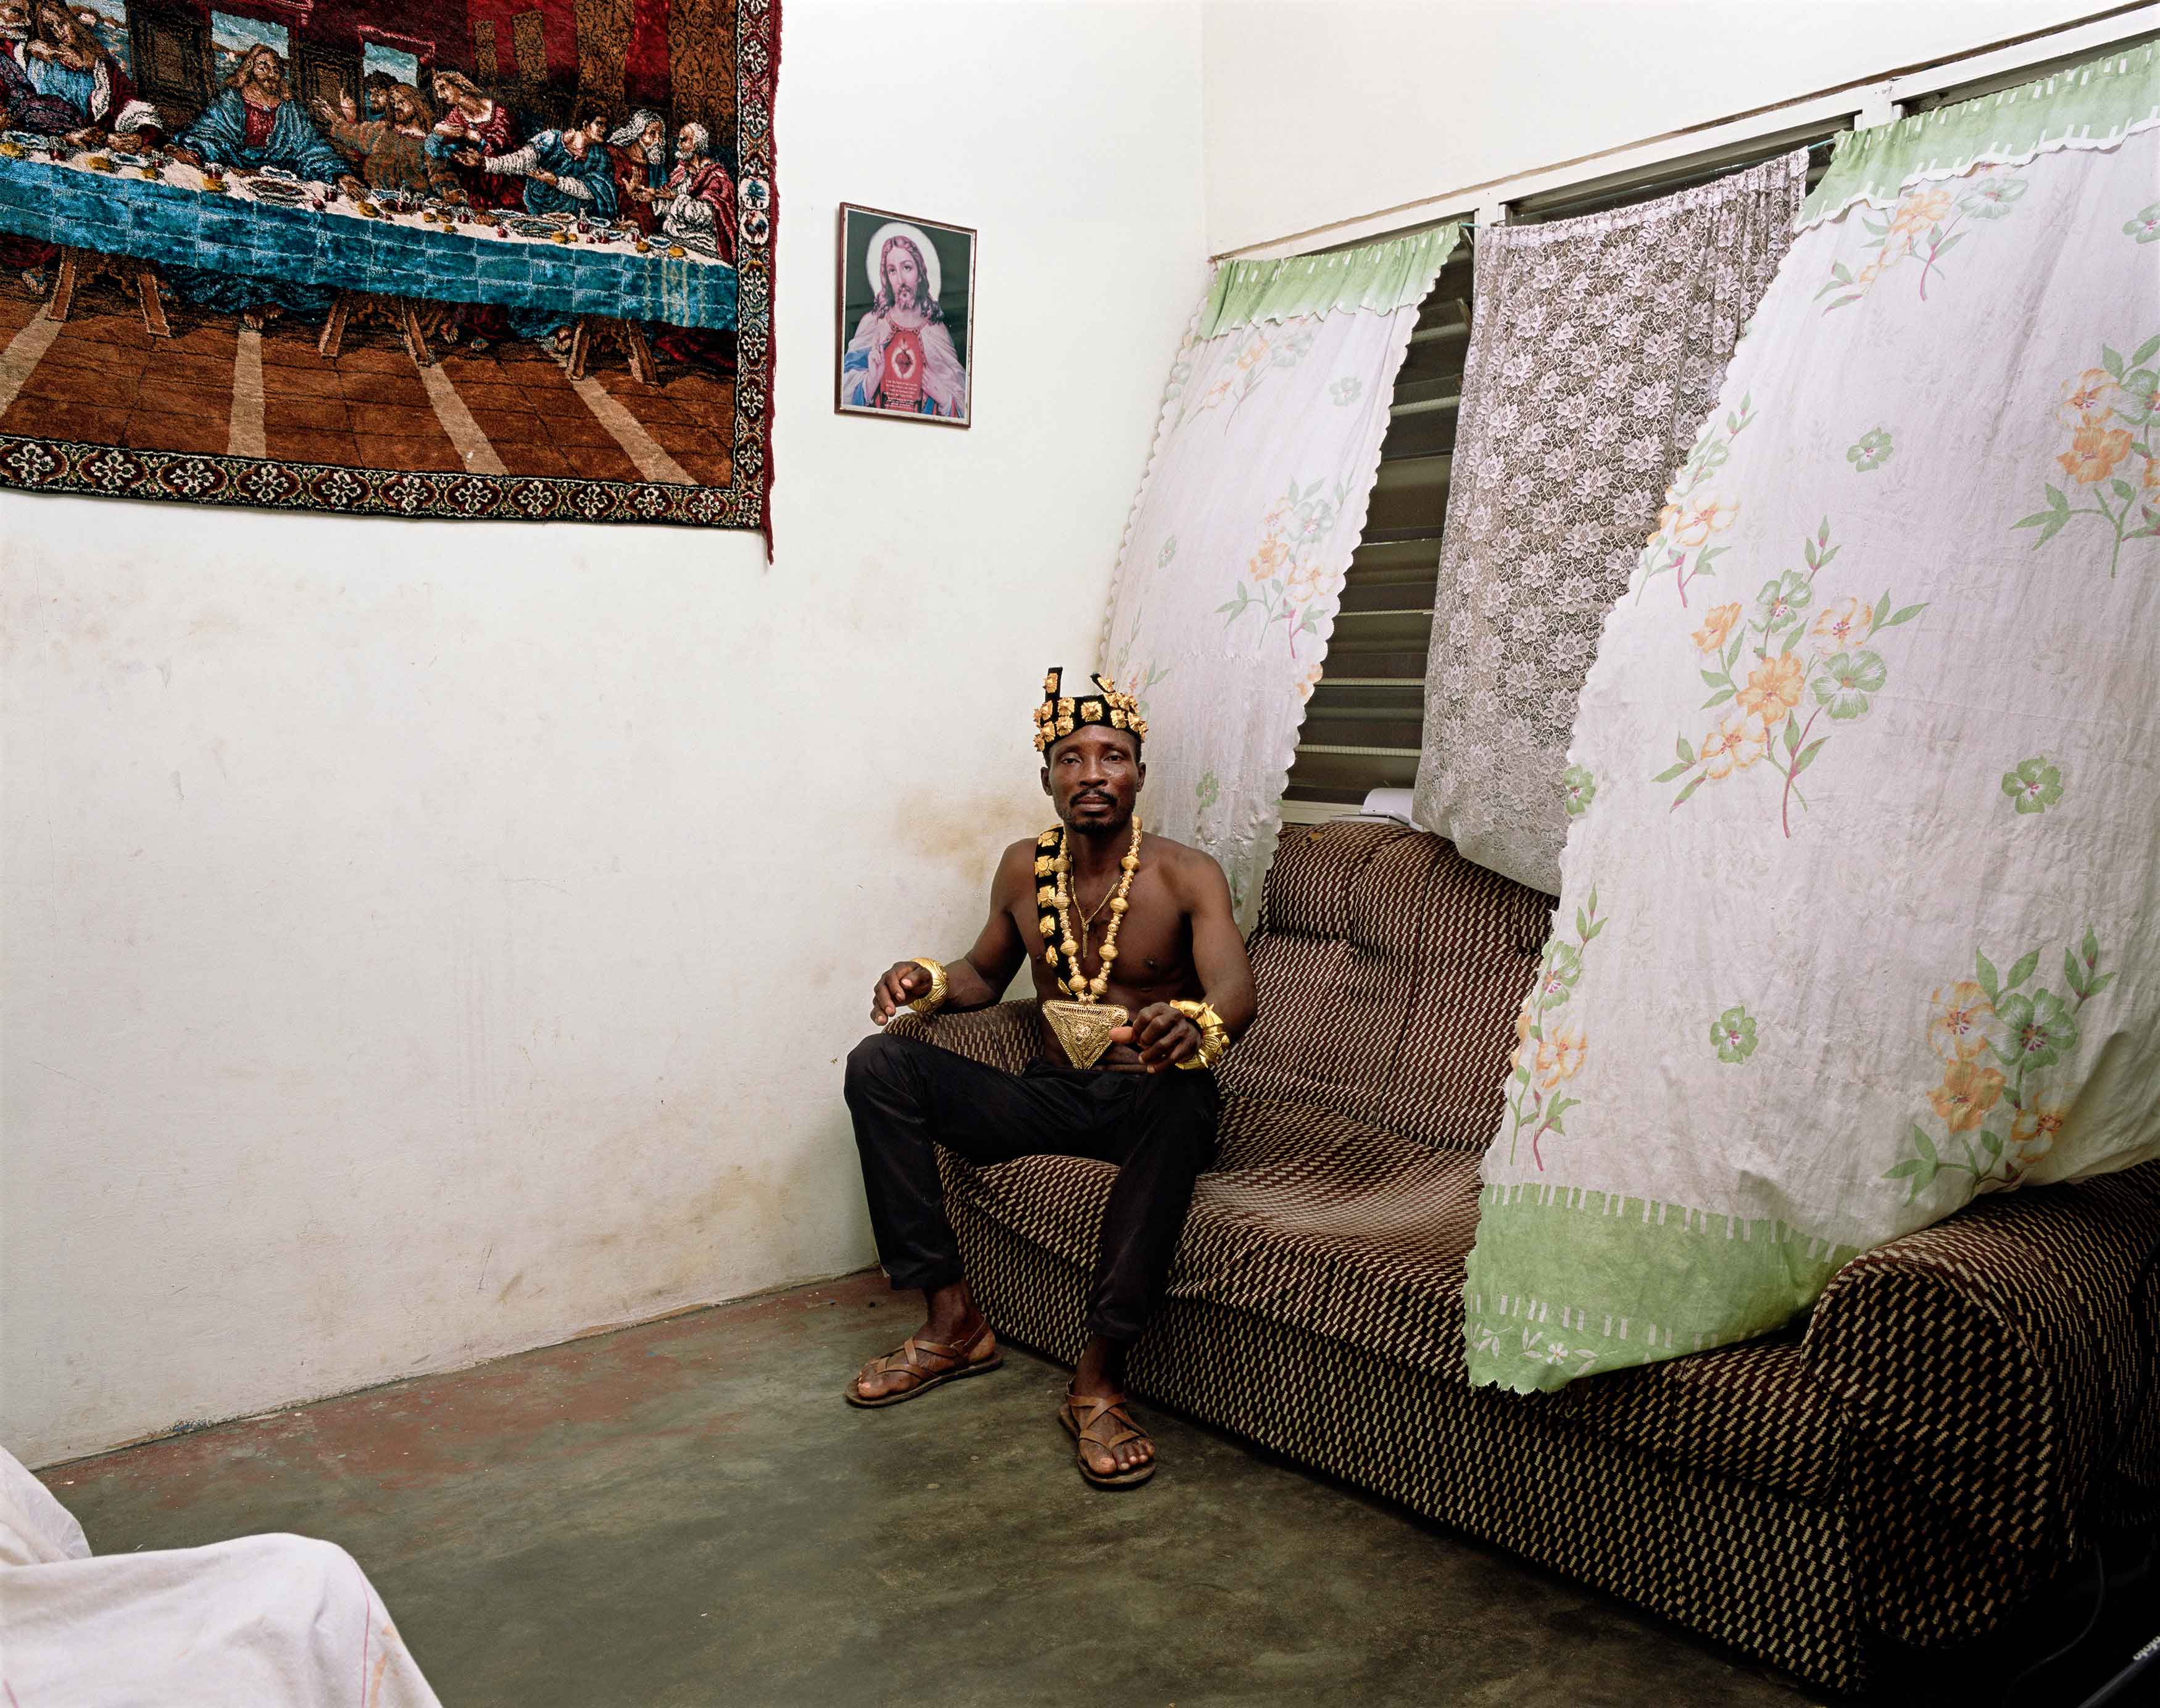 Deana Lawson, <i>Chief</i>, 2019. Courtesy of the artist and Sikkema Jenkins & Co., New York